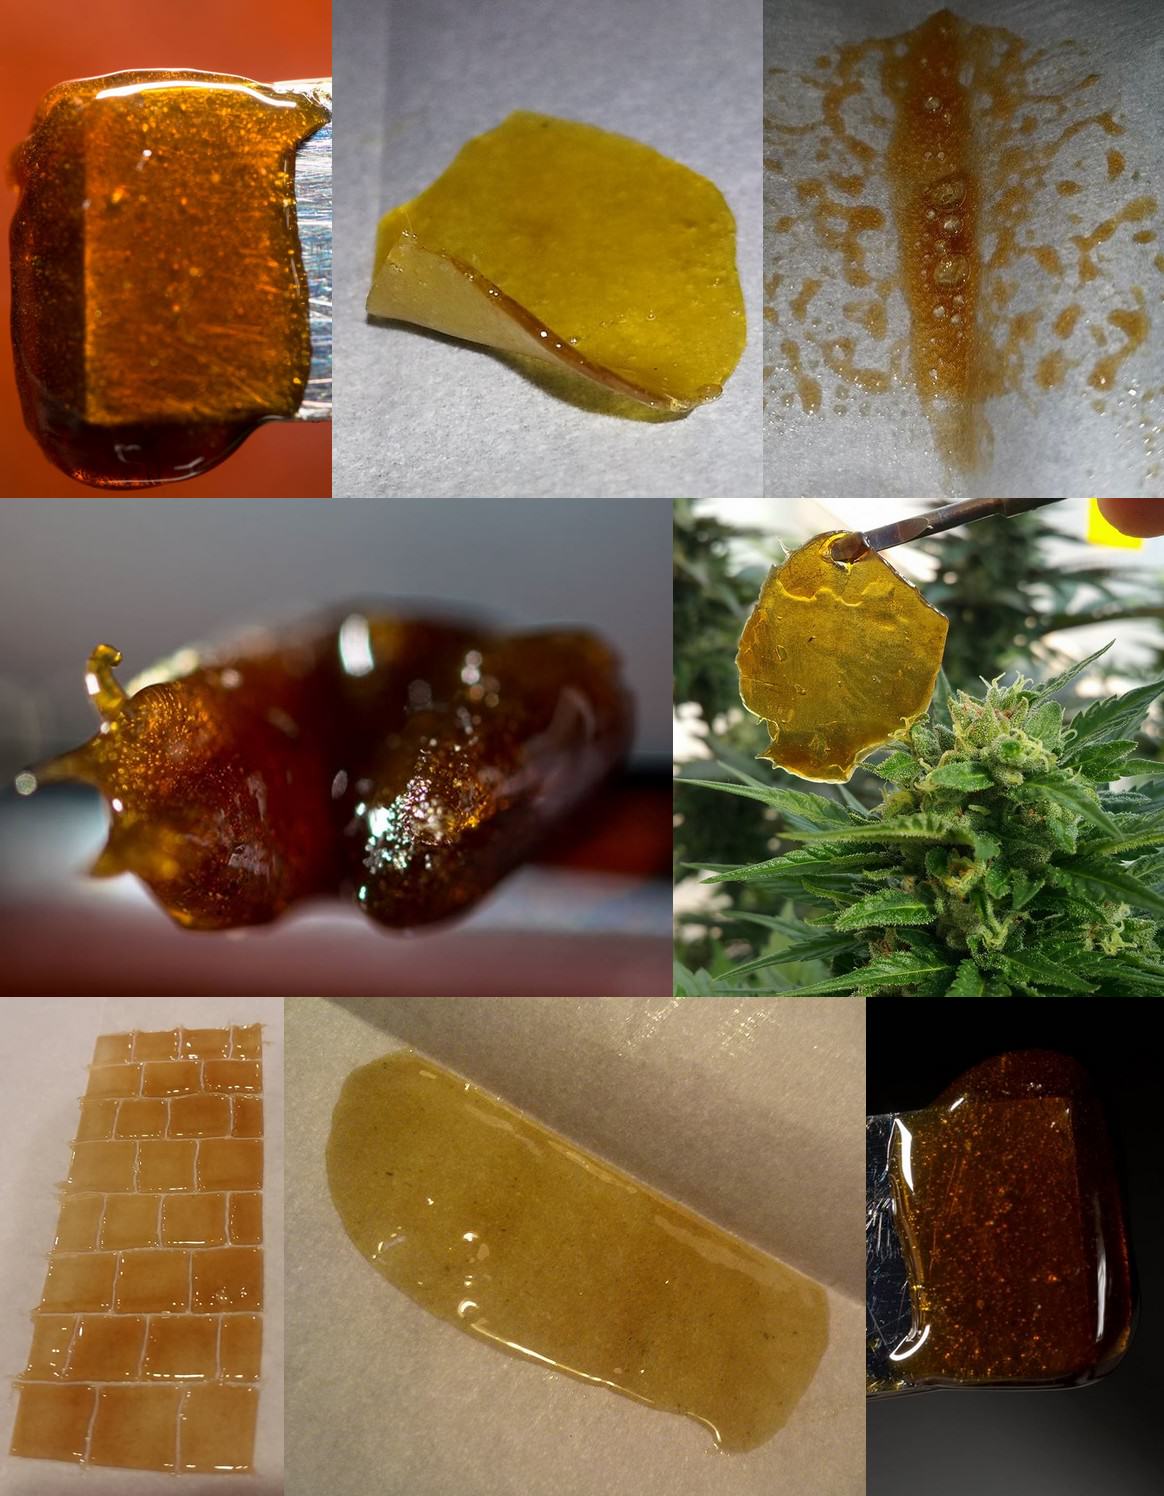 How To Make Your Own Homemade Rosin (dabs)